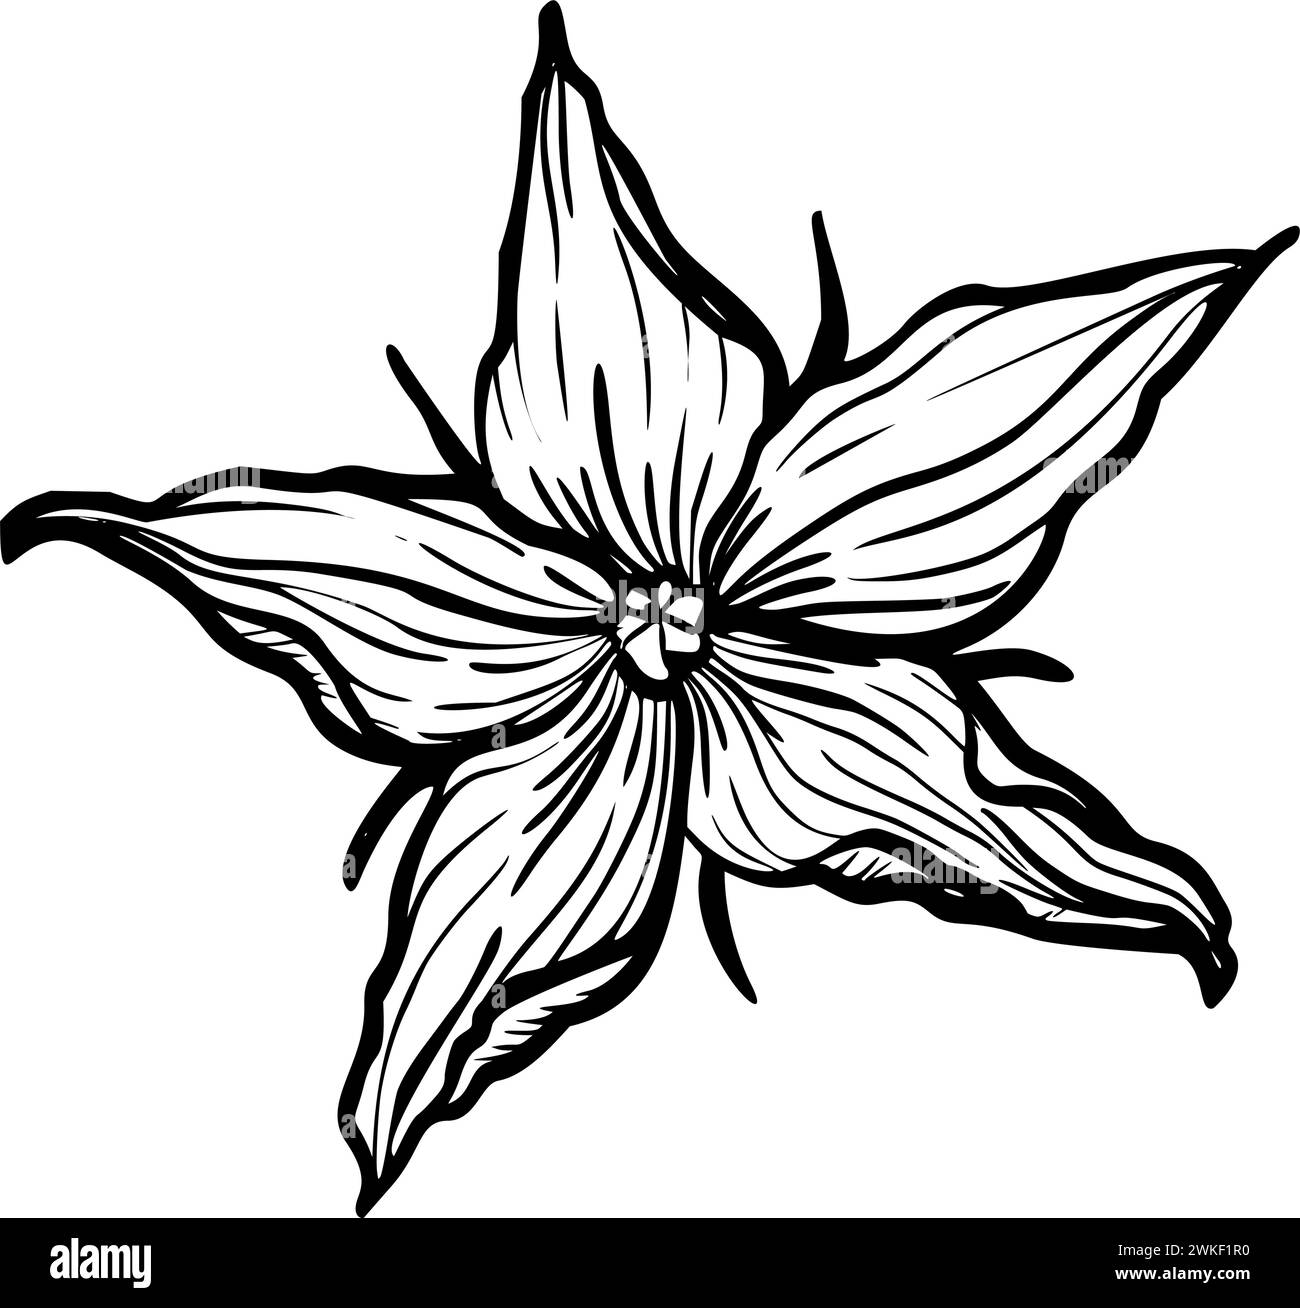 Tomato Flower vector illustration. Plant in line art style. Sketch of lycopersicum solanum in black and white colors. Etching of blooming herb painted by inks. Monochrome botanical engraving. Stock Vector